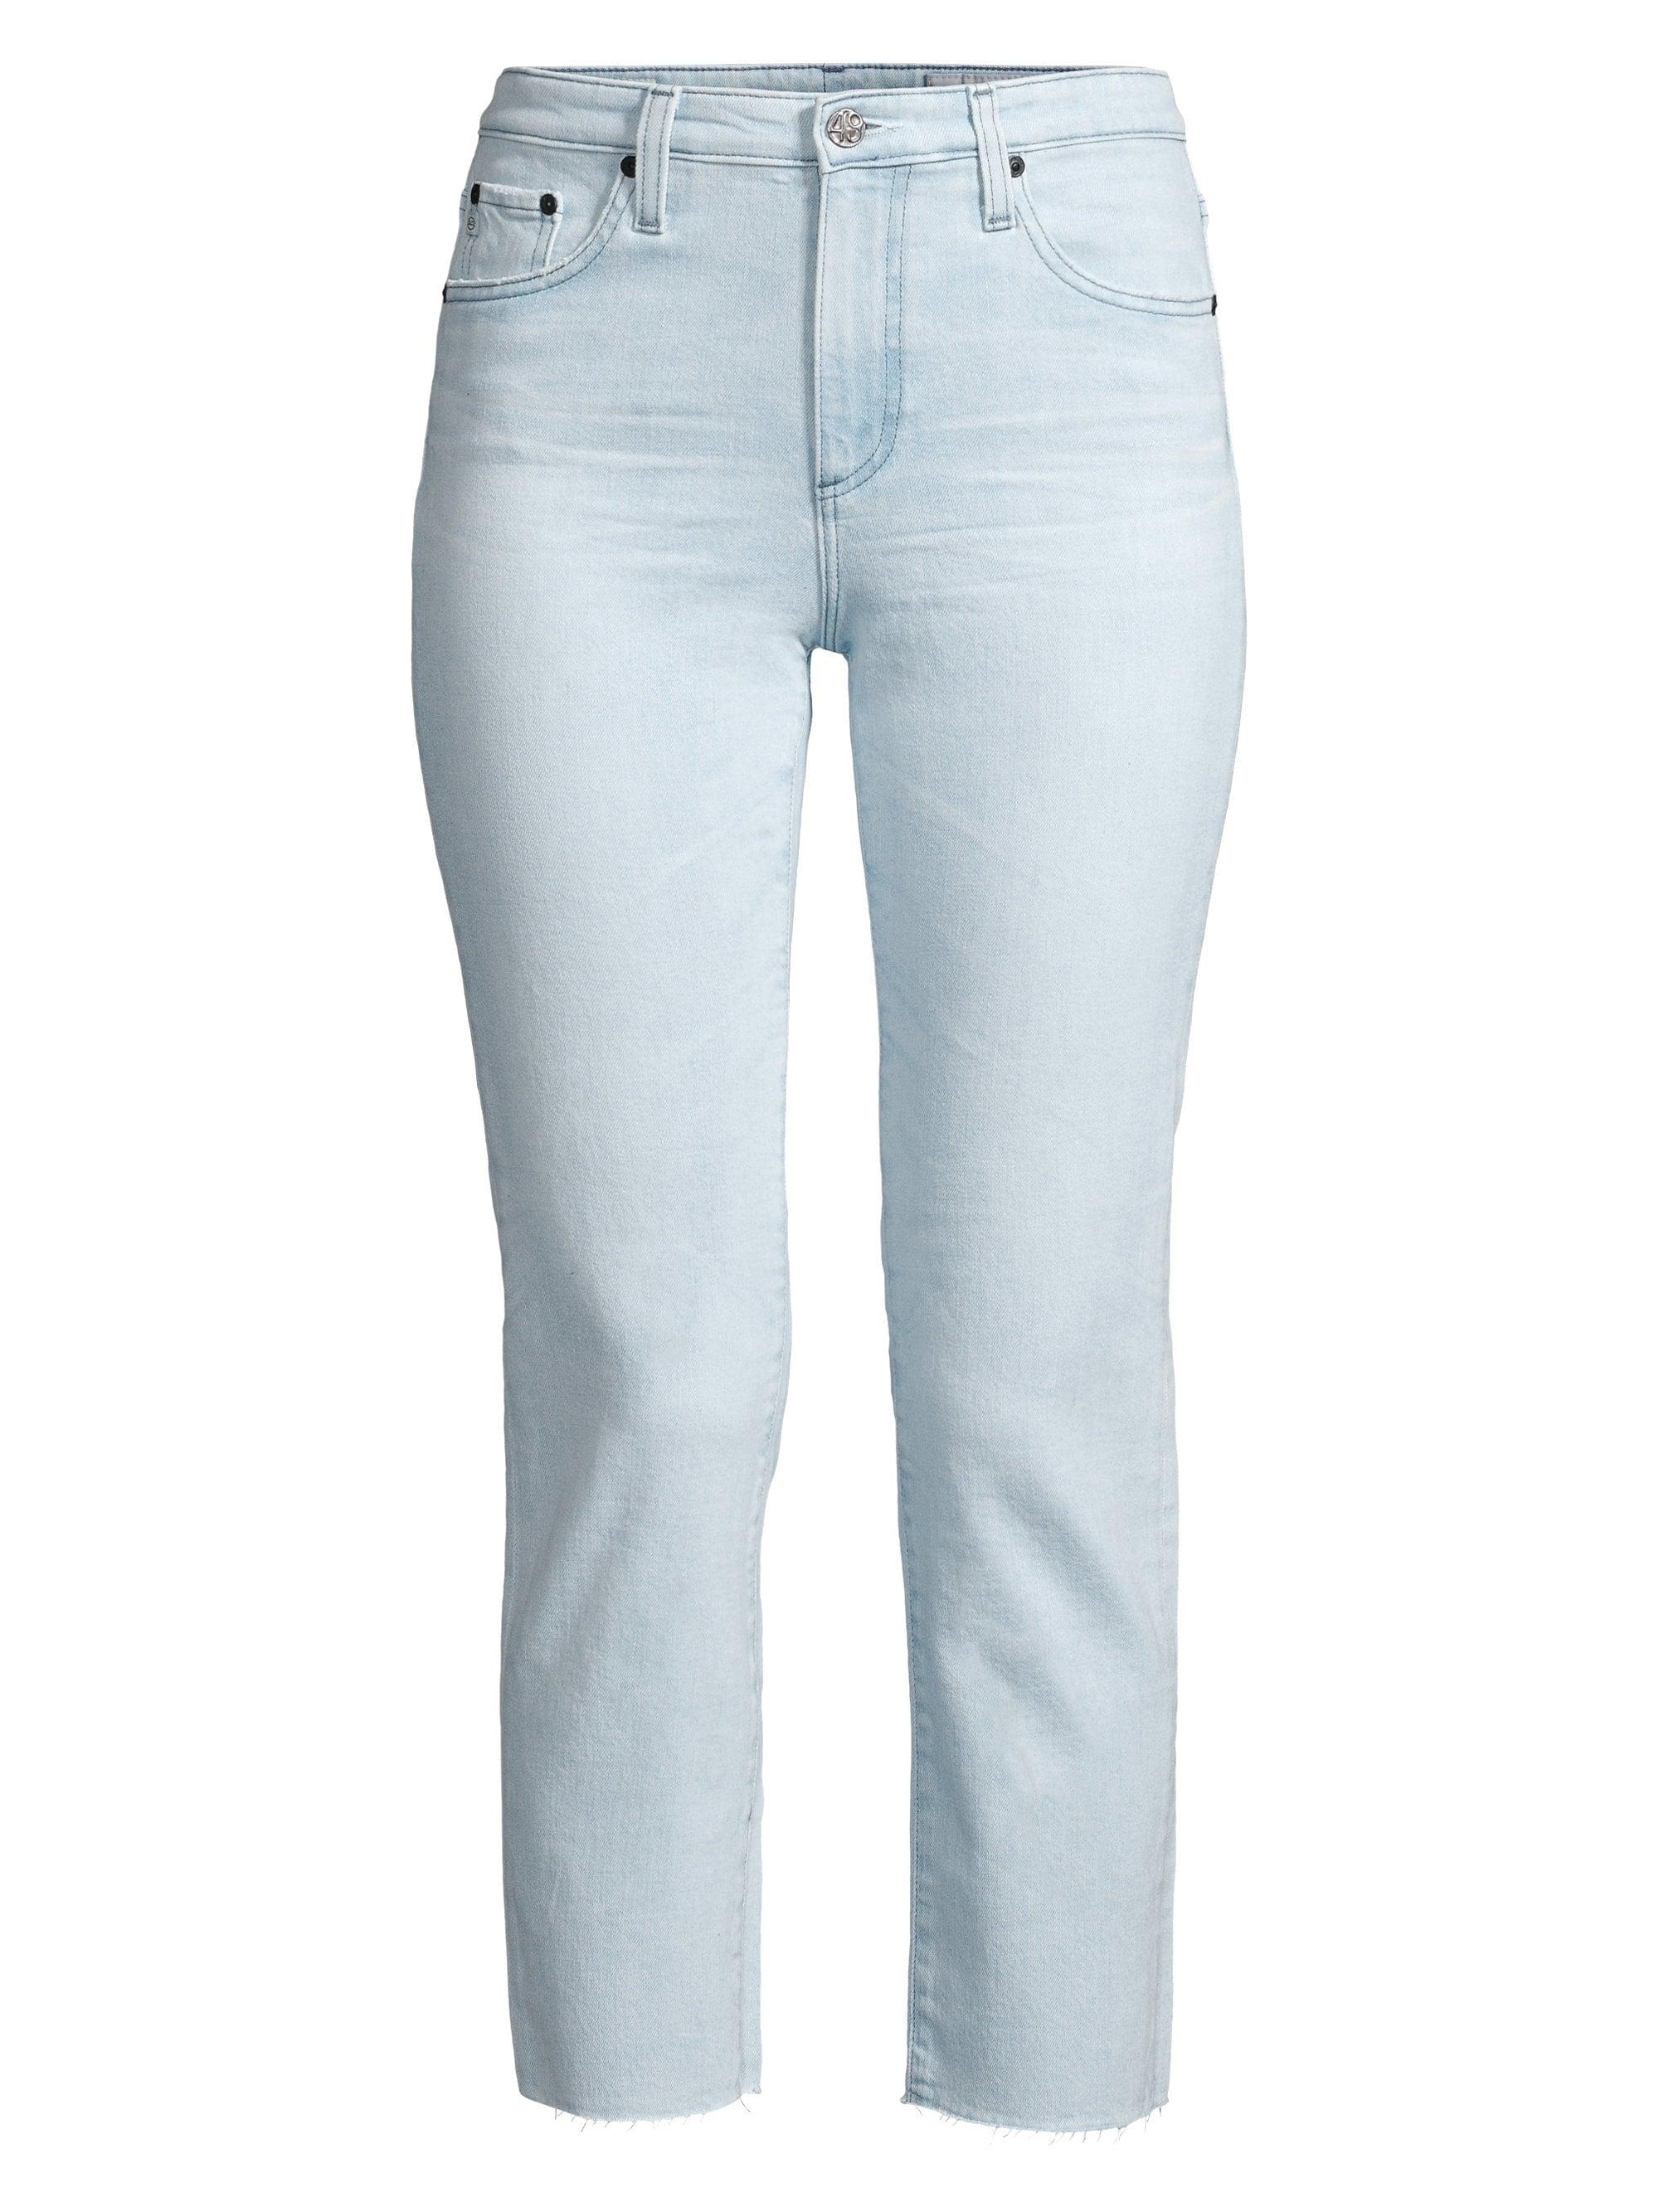 AG Jeans Isabelle Cropped Skinny Jeans in Blue - Lyst